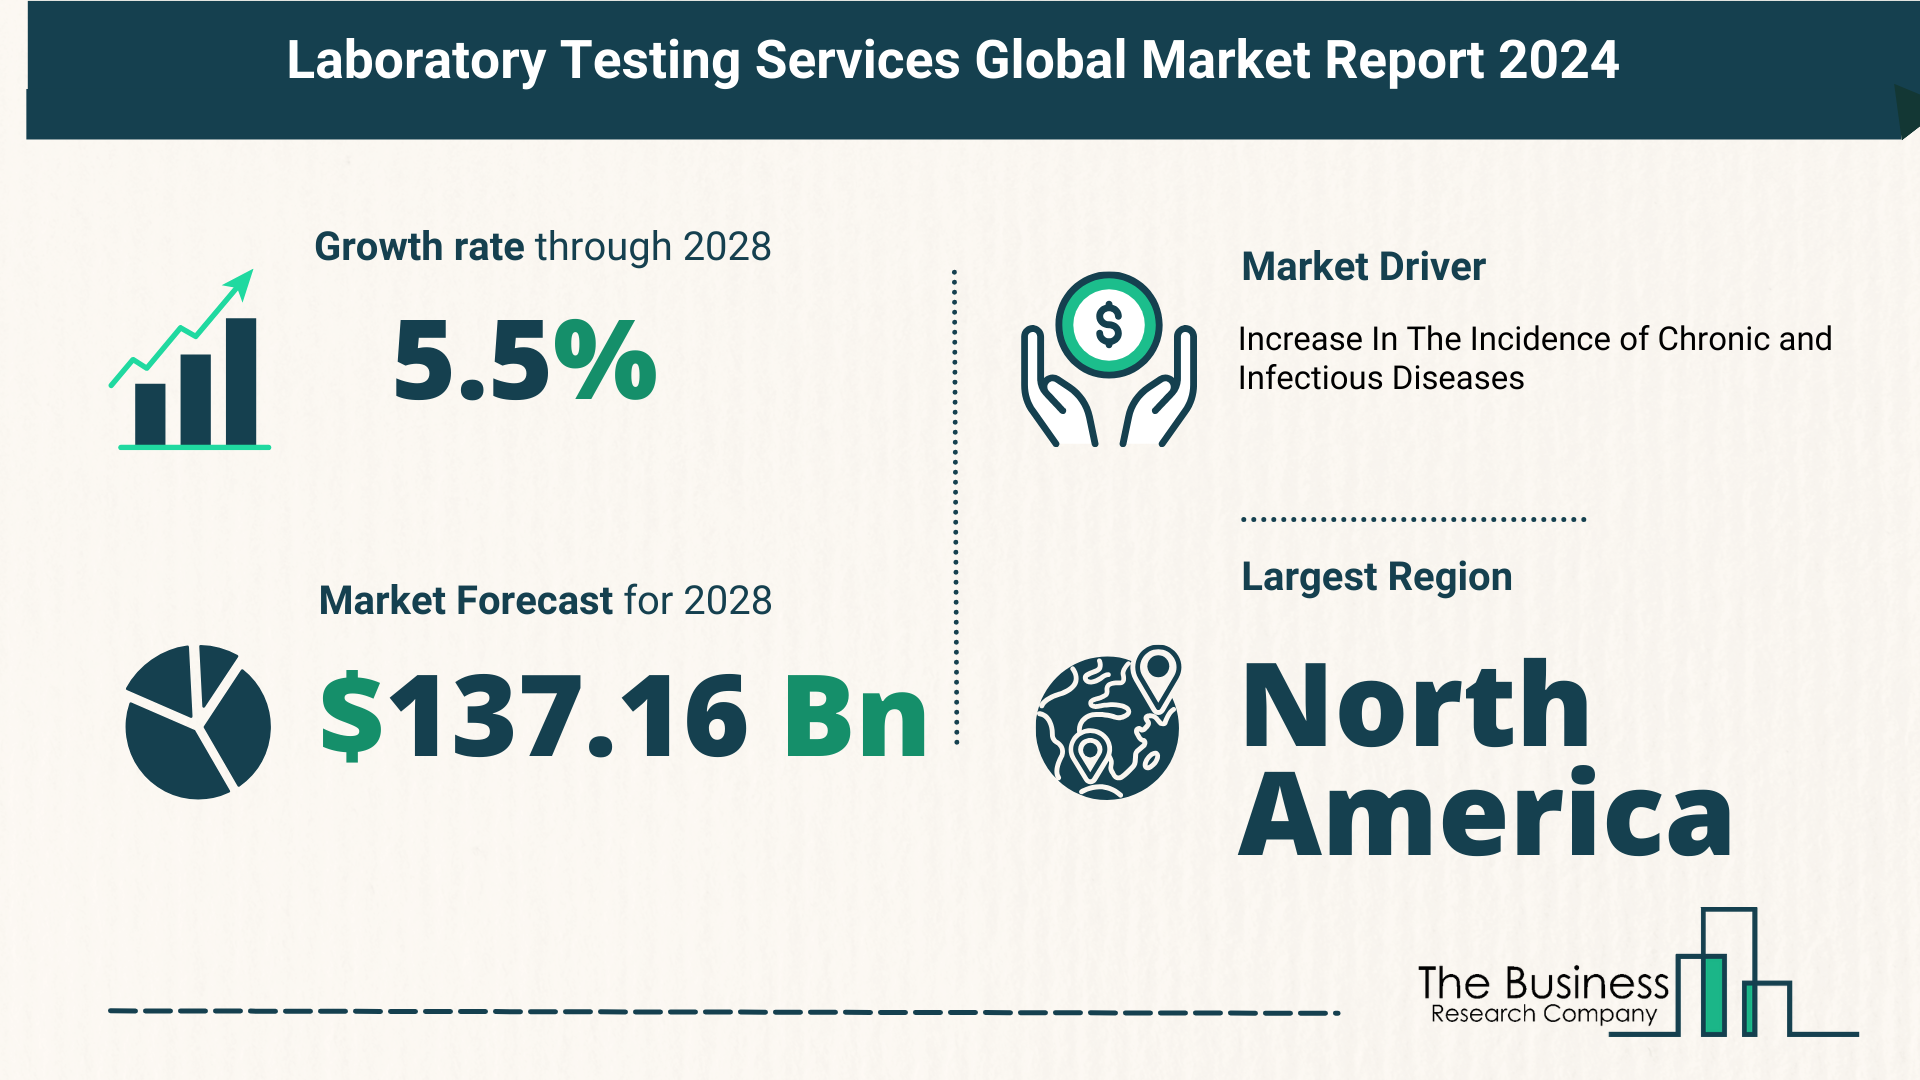 Top 5 Insights From The Laboratory Testing Services Market Report 2024